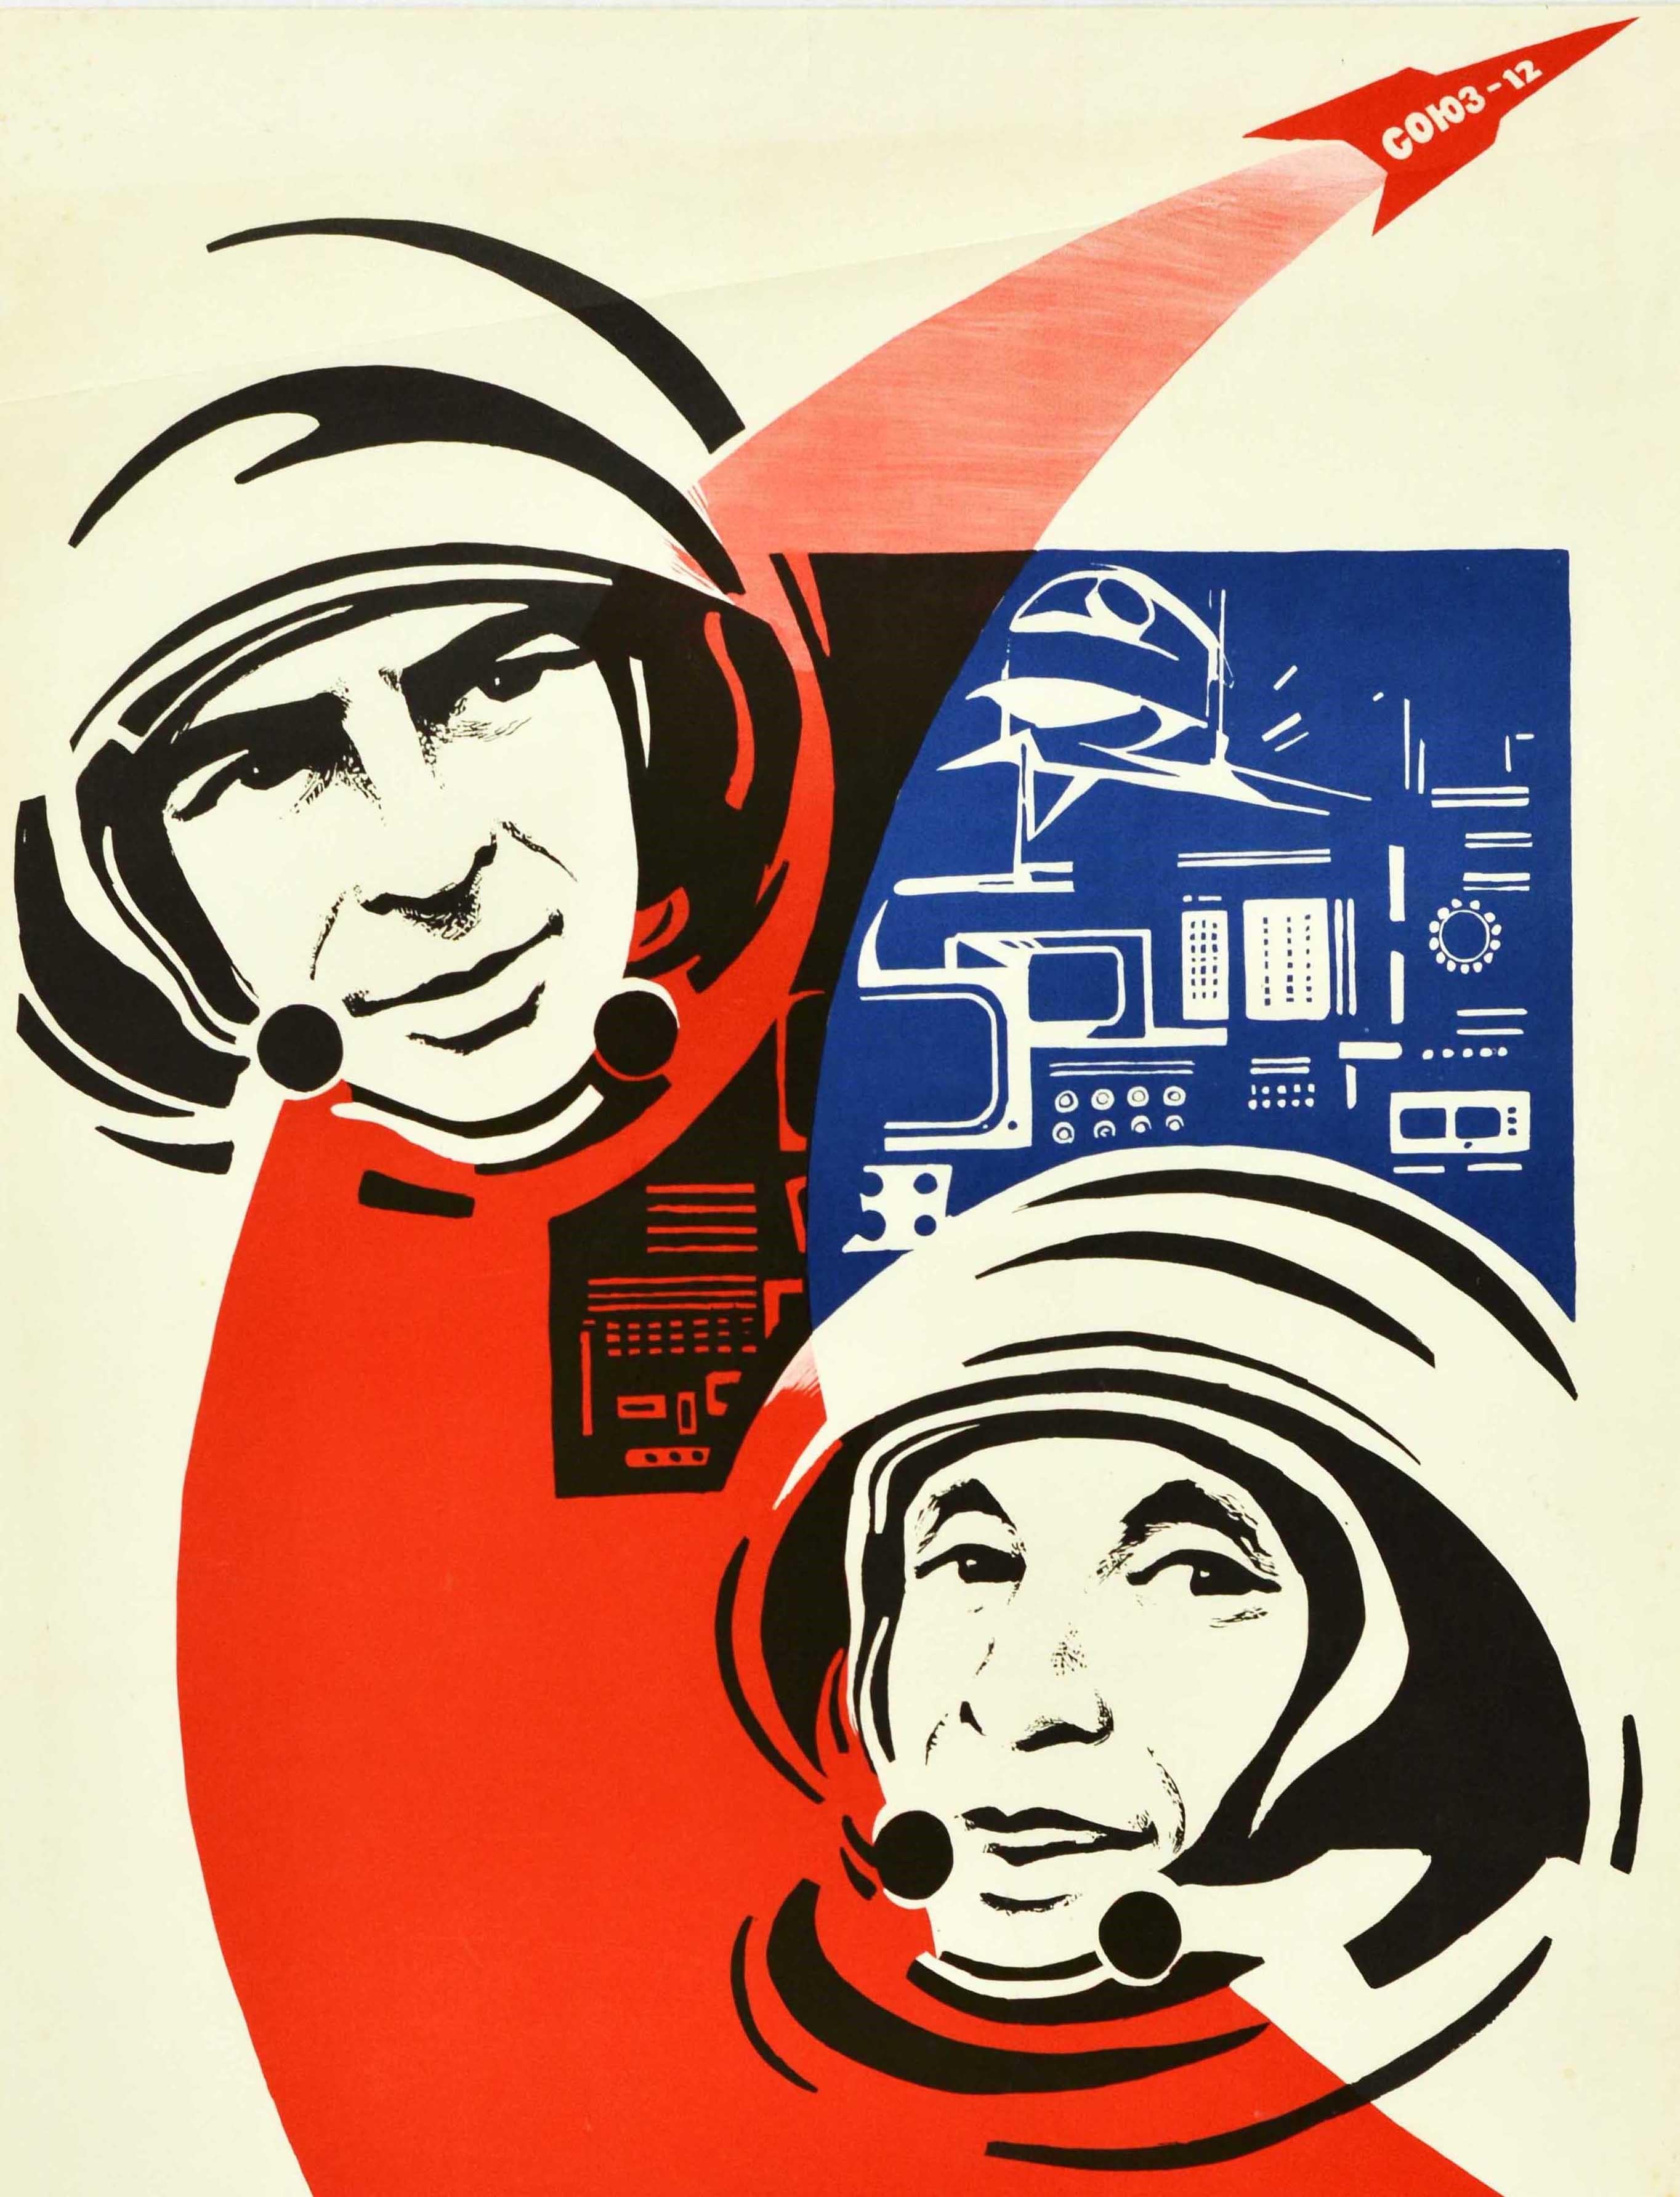 Original Vintage Soviet Poster Glory To Space Workers Cosmonauts Soyuz 12 Rocket In Good Condition For Sale In London, GB